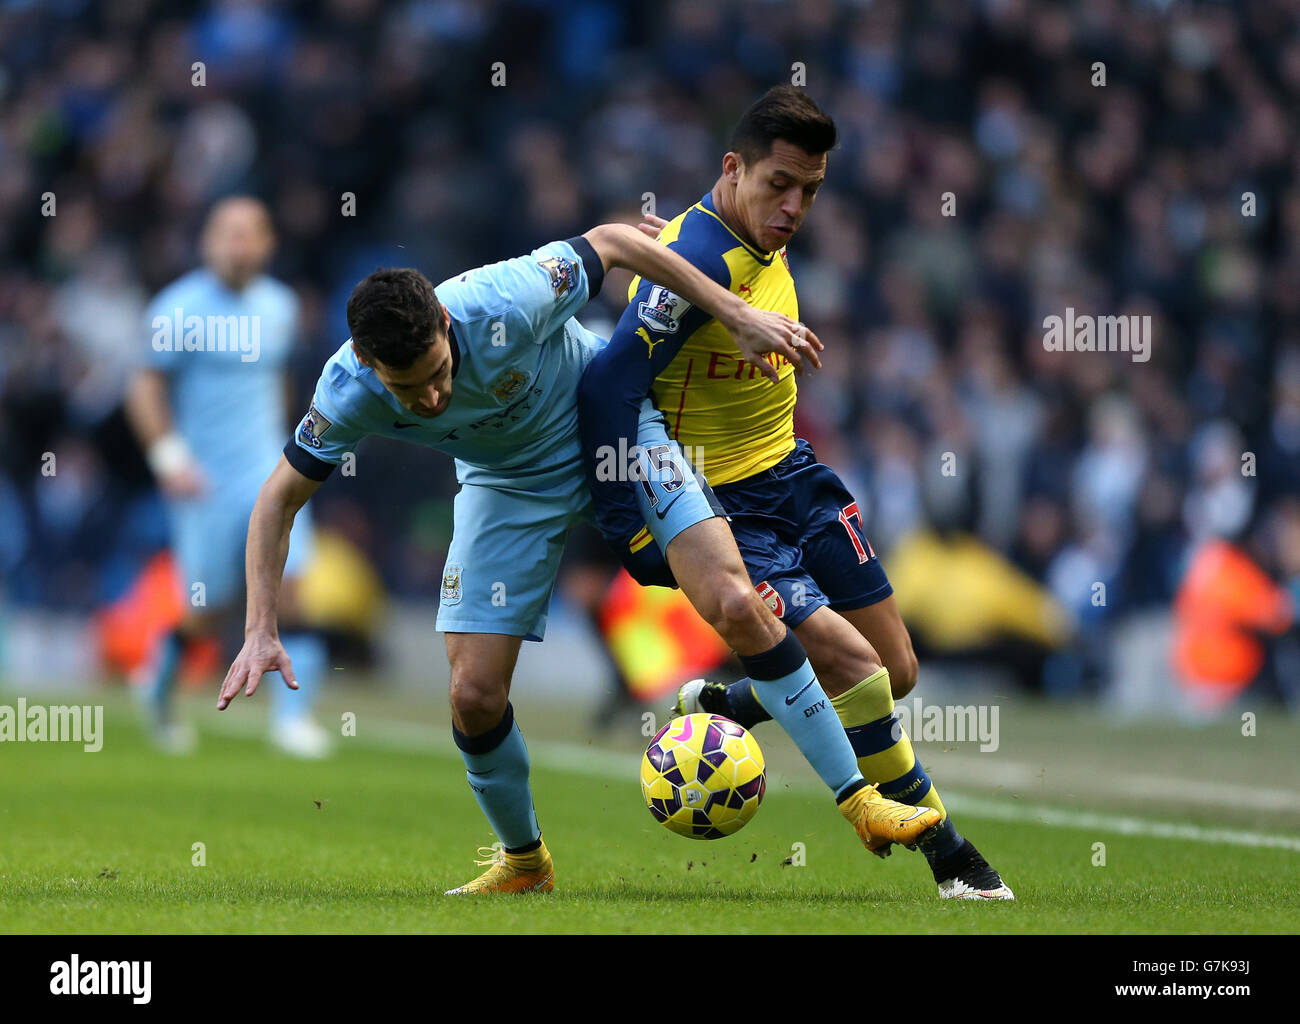 Arsenal's Alexis Sanchez (rightt) and Manchester City's Jesus Navas battle for the ball during the Barclays Premier League match at the Etihad Stadium, Manchester. Stock Photo